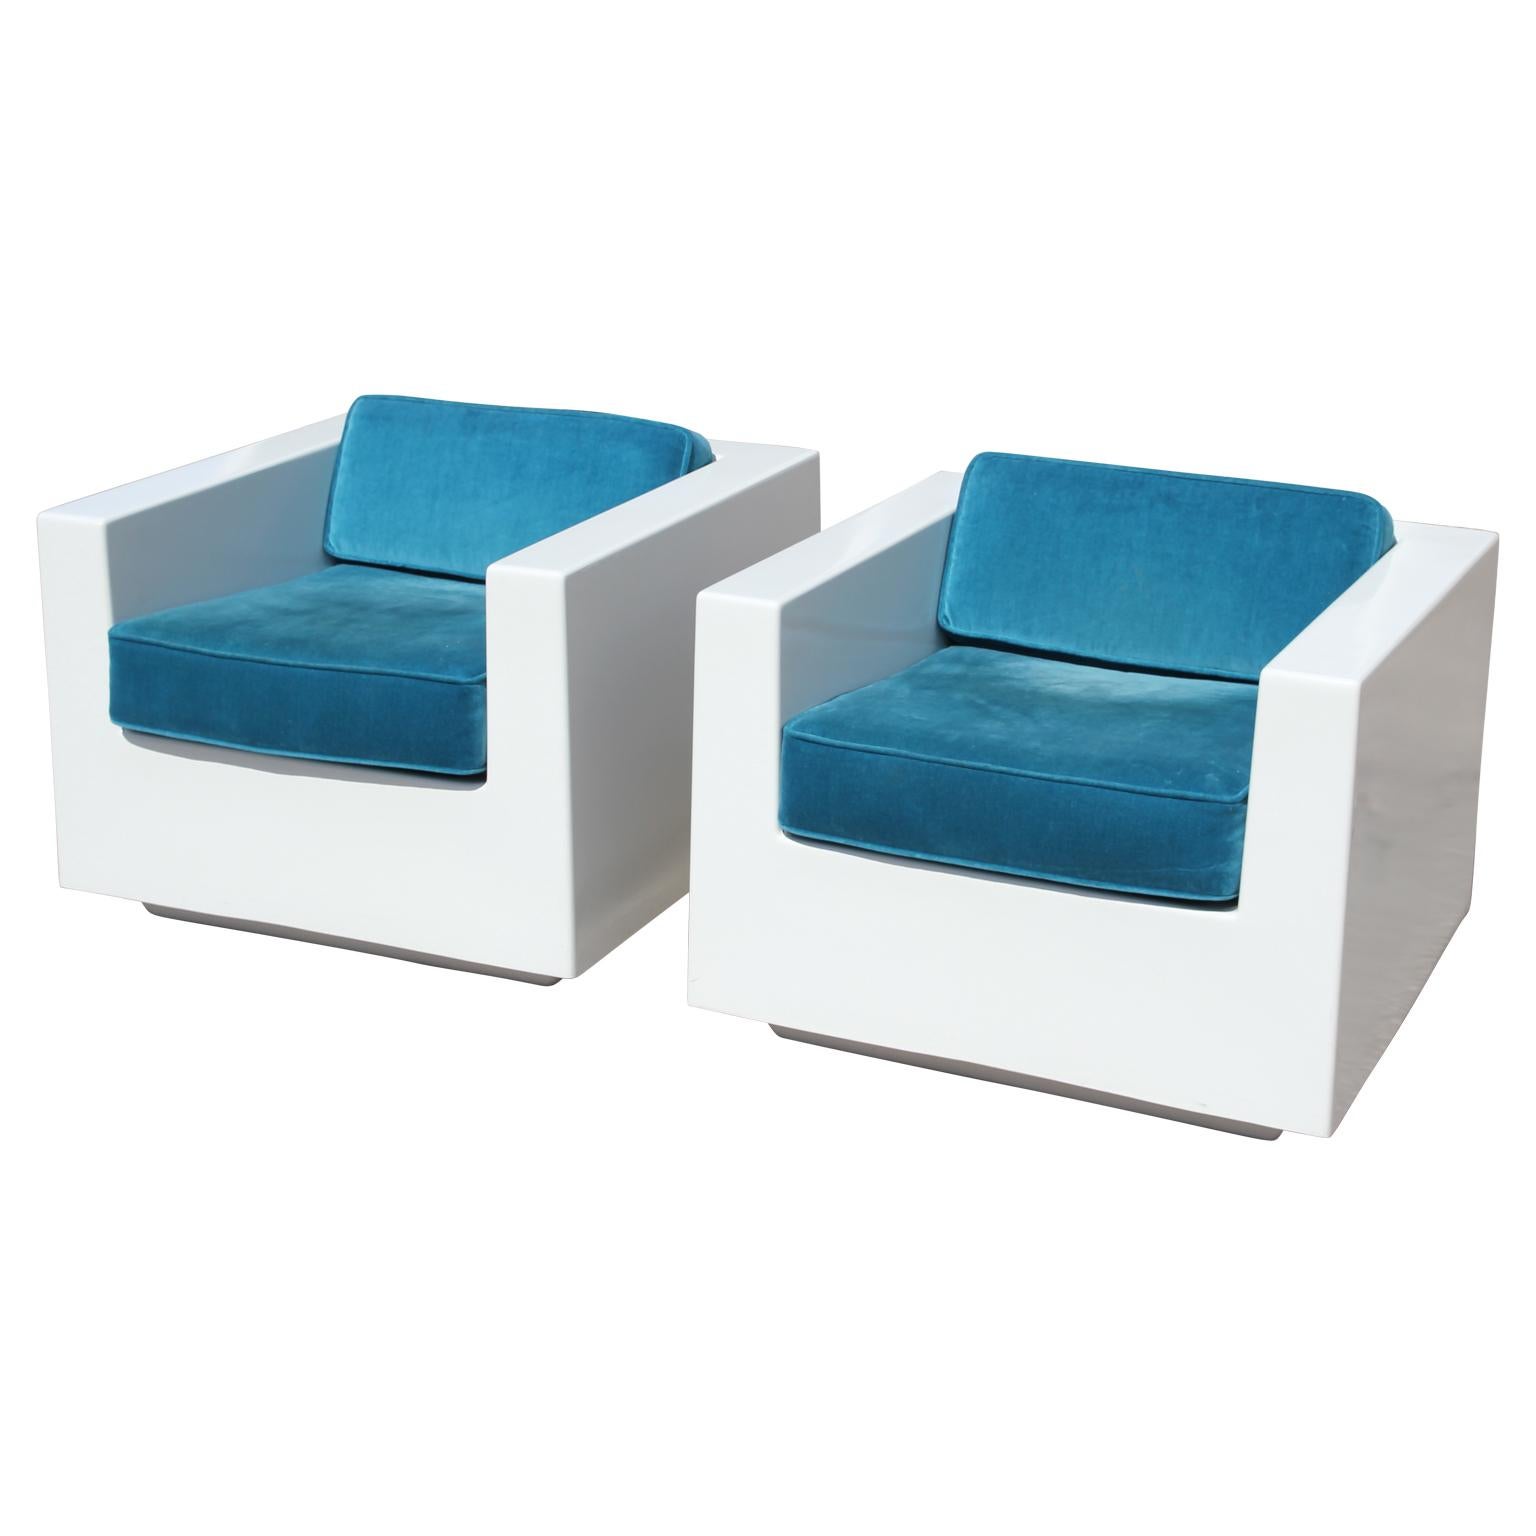 Pair of white modern cube fiberglass armchairs with teal velvet seats. These chairs are stunning in person. The upholstery is worn and needs updating. We reupholster for around $295 each. Possibly Italian.